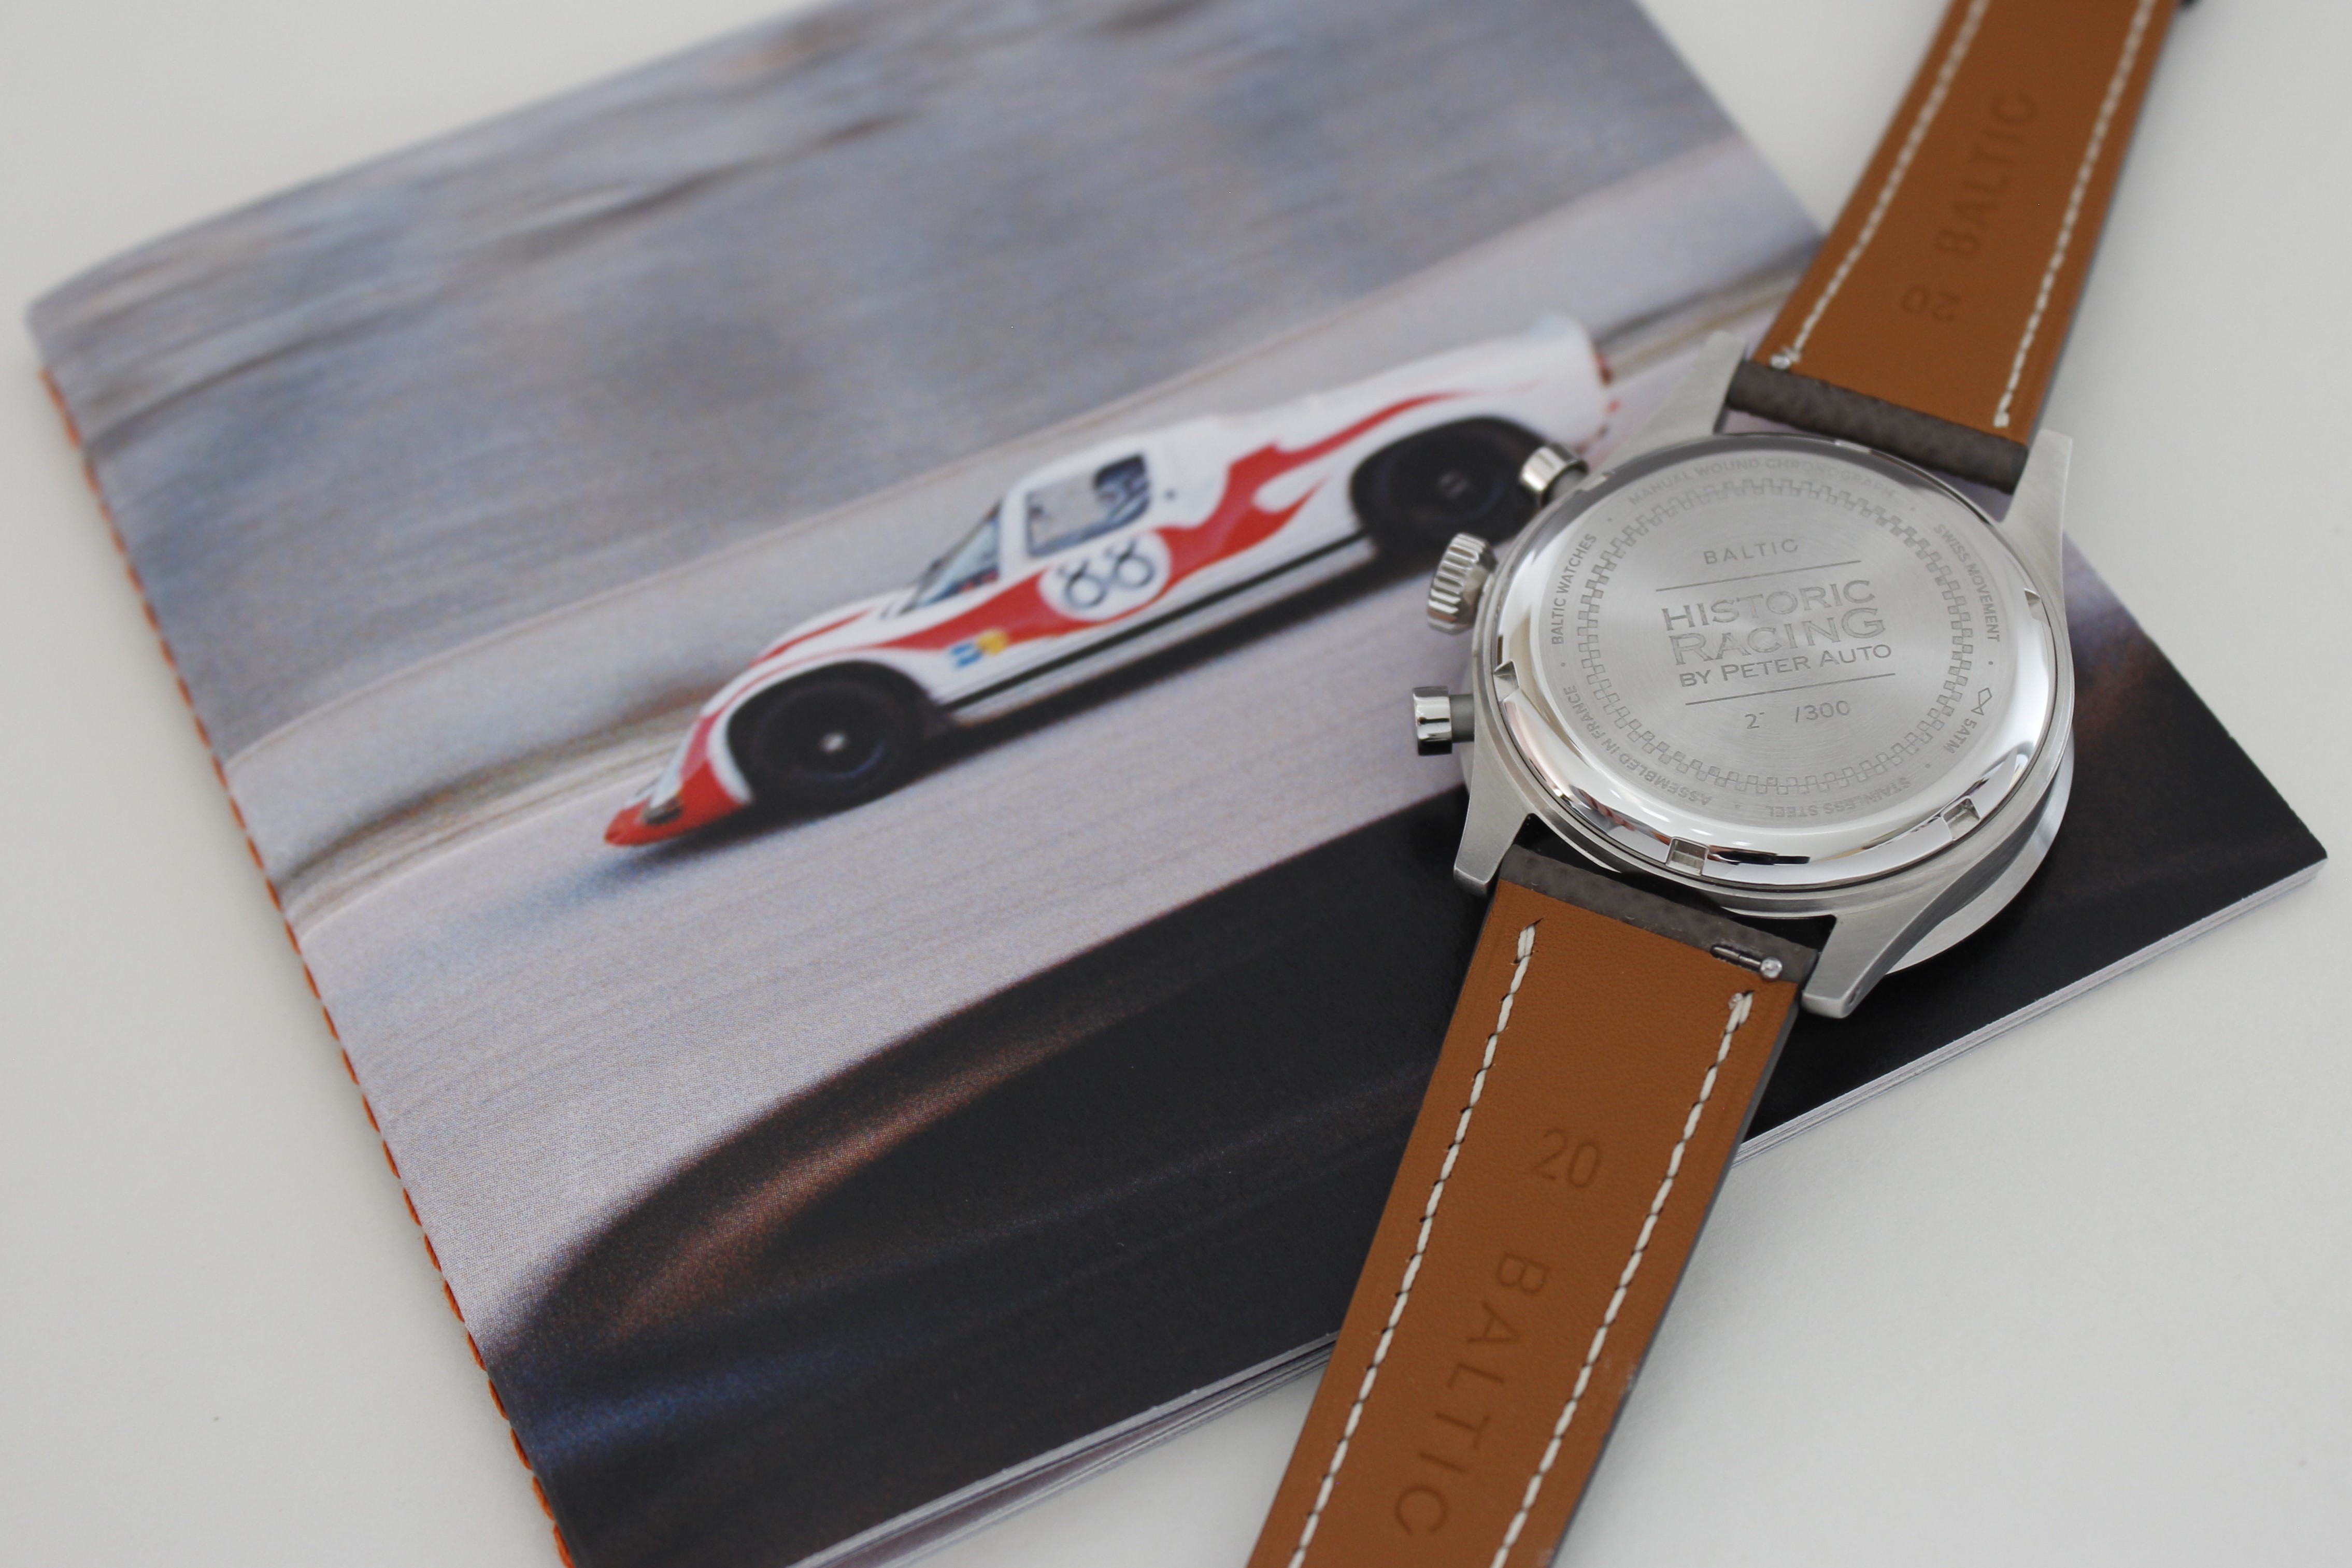 BALTIC x PETER AUTO WATCH SET LIMITED EDITION - Image 11 of 11